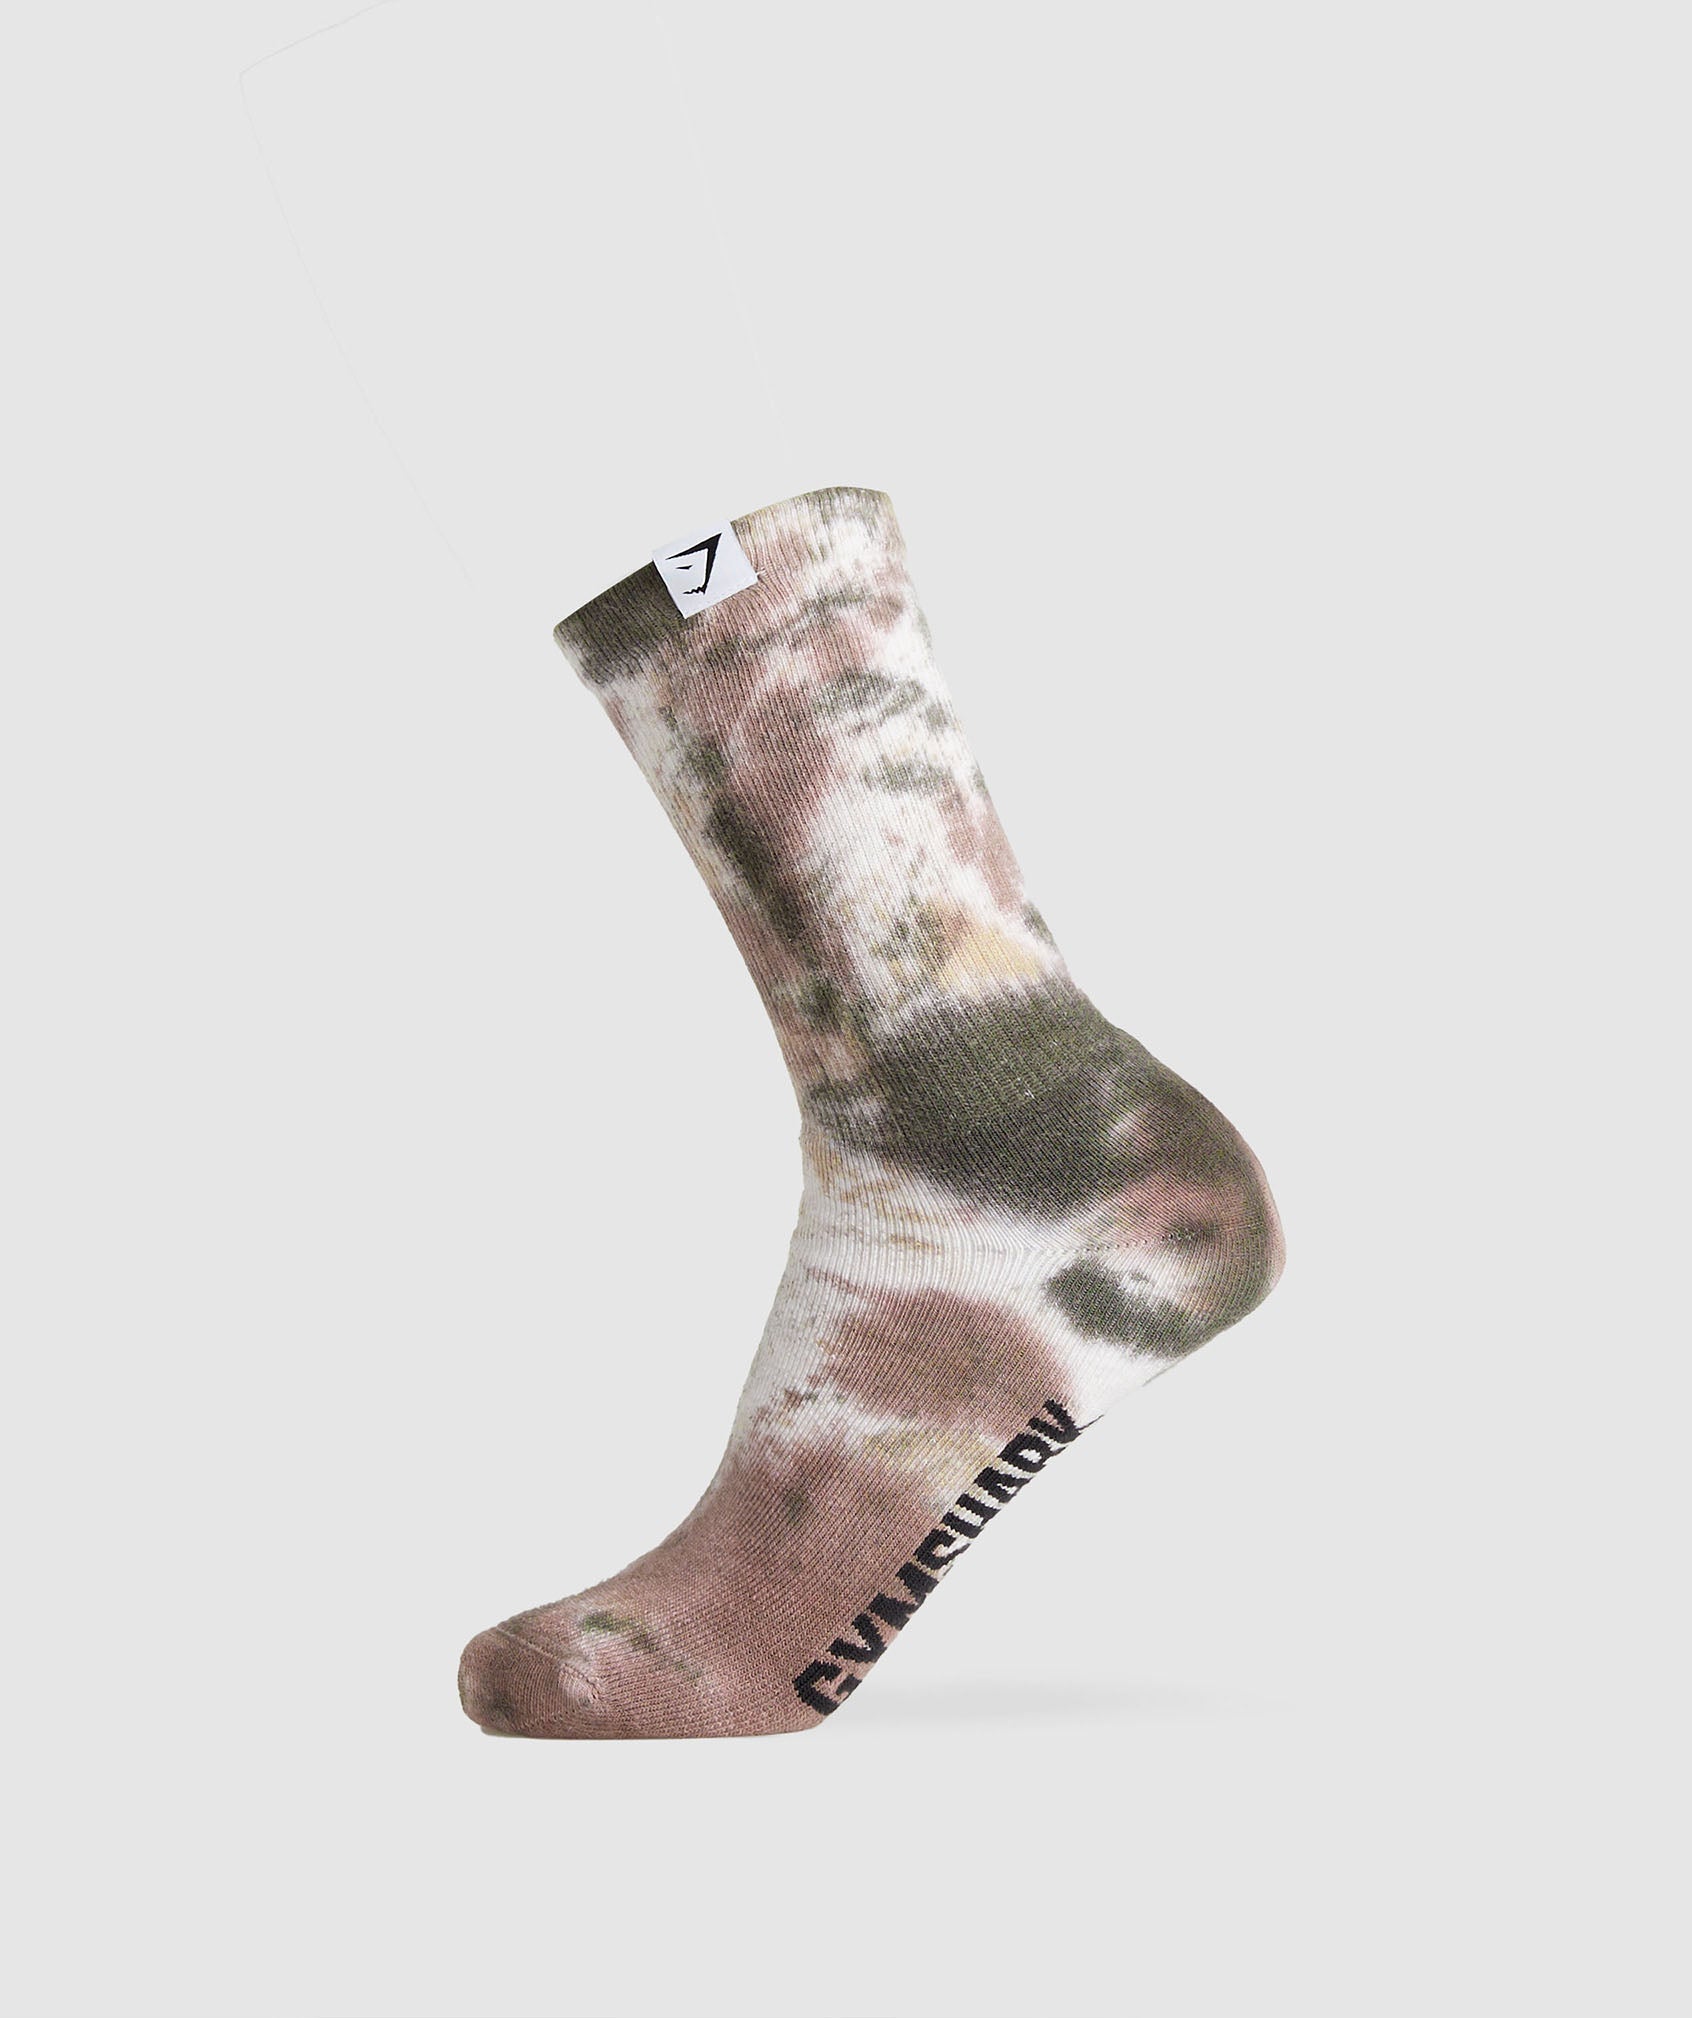 Tie Dye Crew Socks in White/Sand Brown/Taupe Brown/Deep Olive Green - view 1